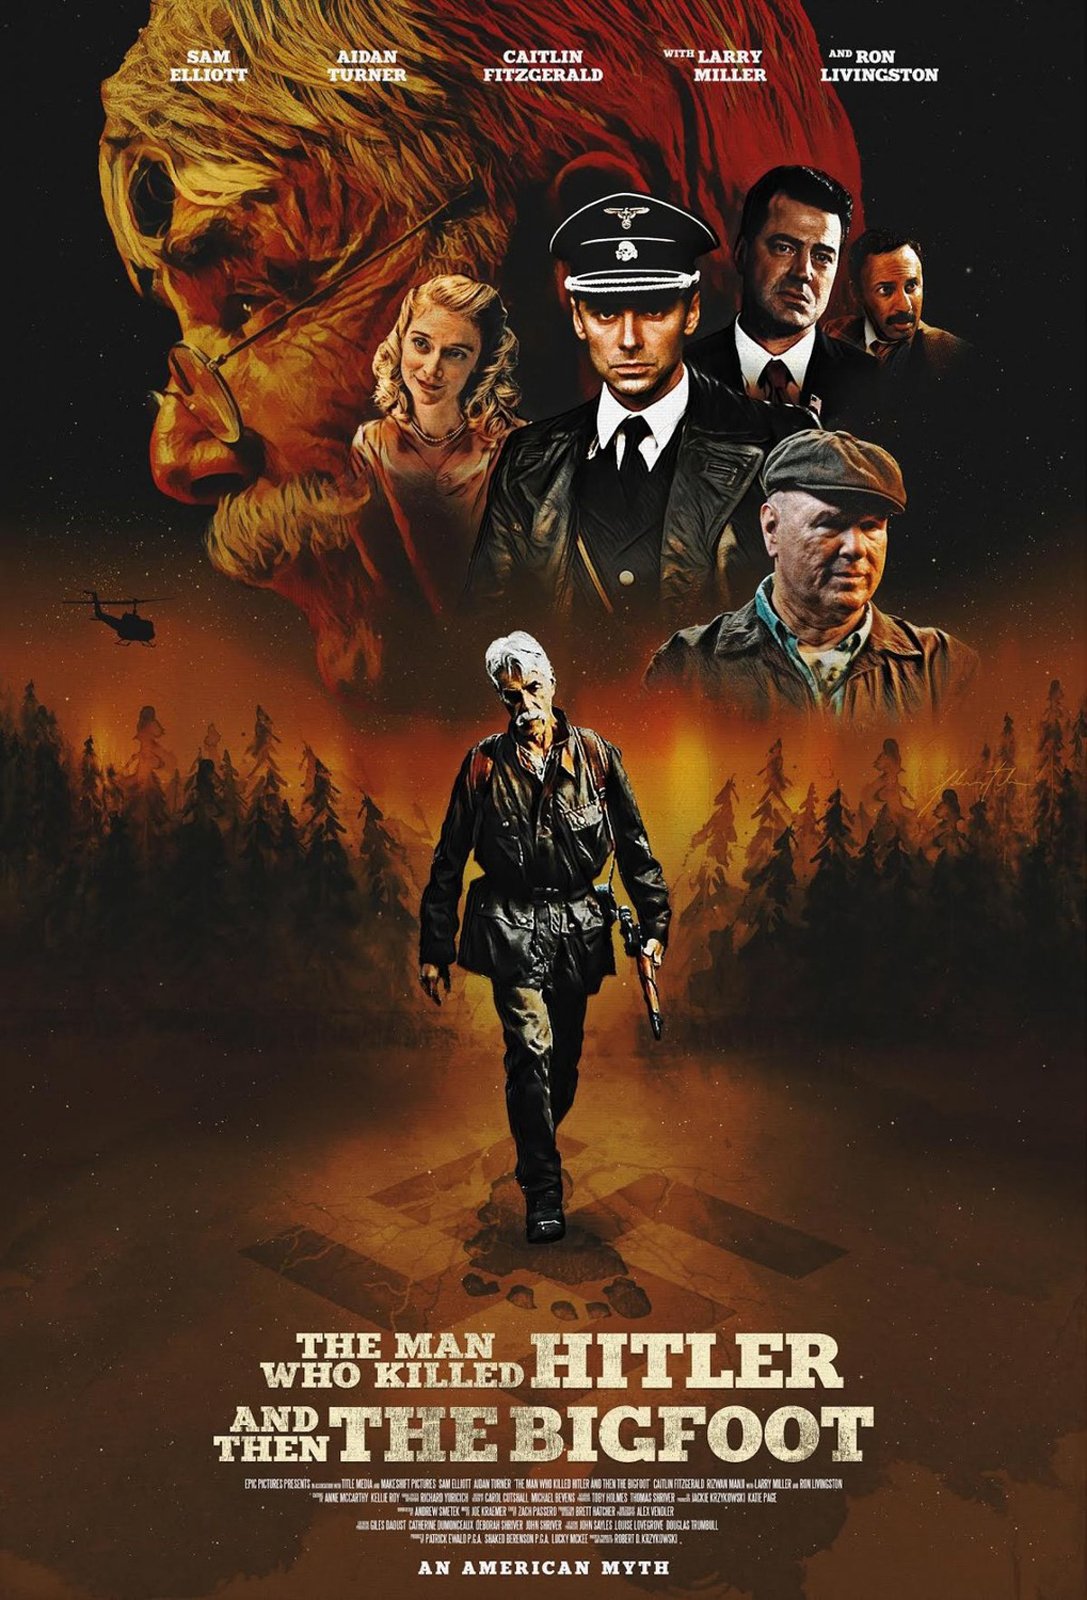 The Man Who Killed Hitler And Then The Bigfoot - film 2018 - AlloCiné1087 x 1600